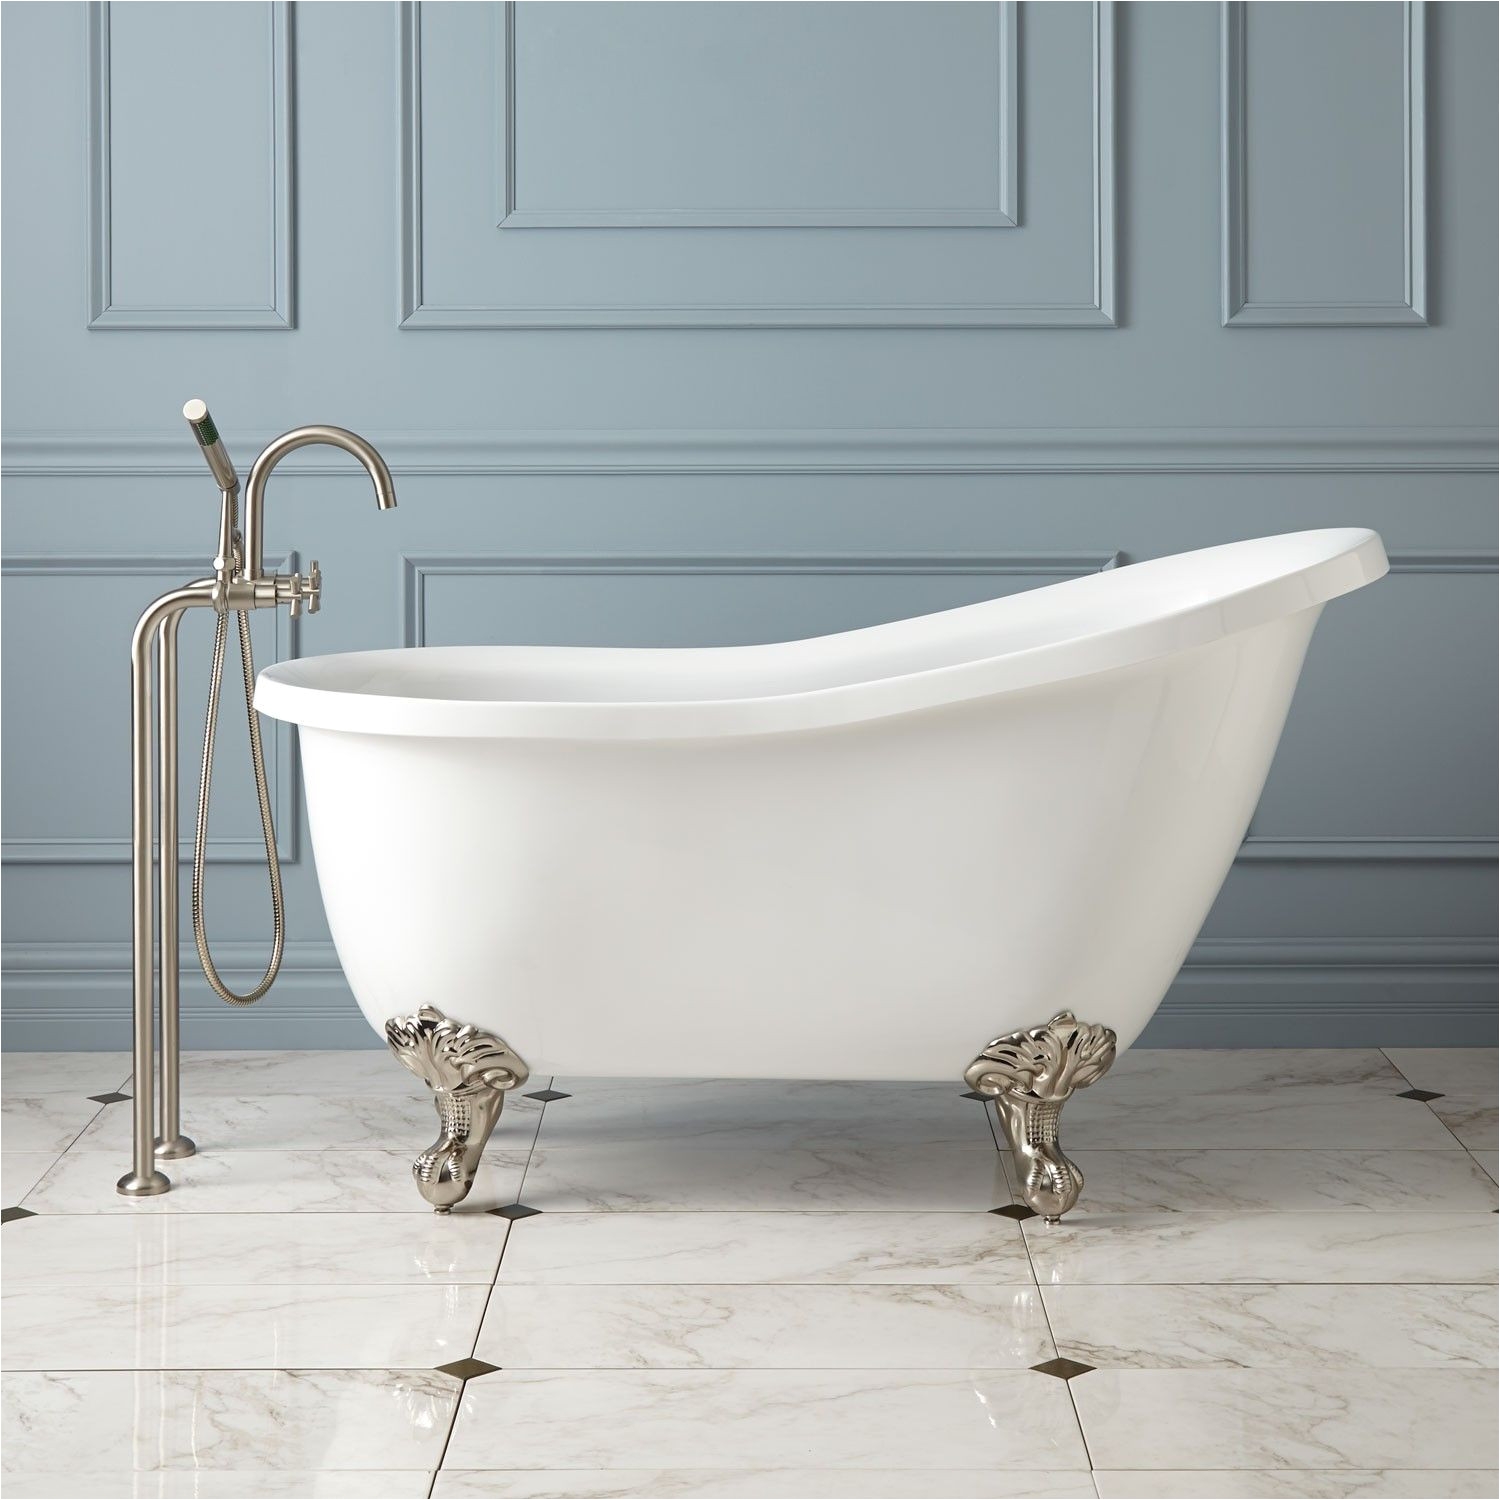 ultra acrylic slipper clawfoot tub a small lightweight antique tub that i can put in a